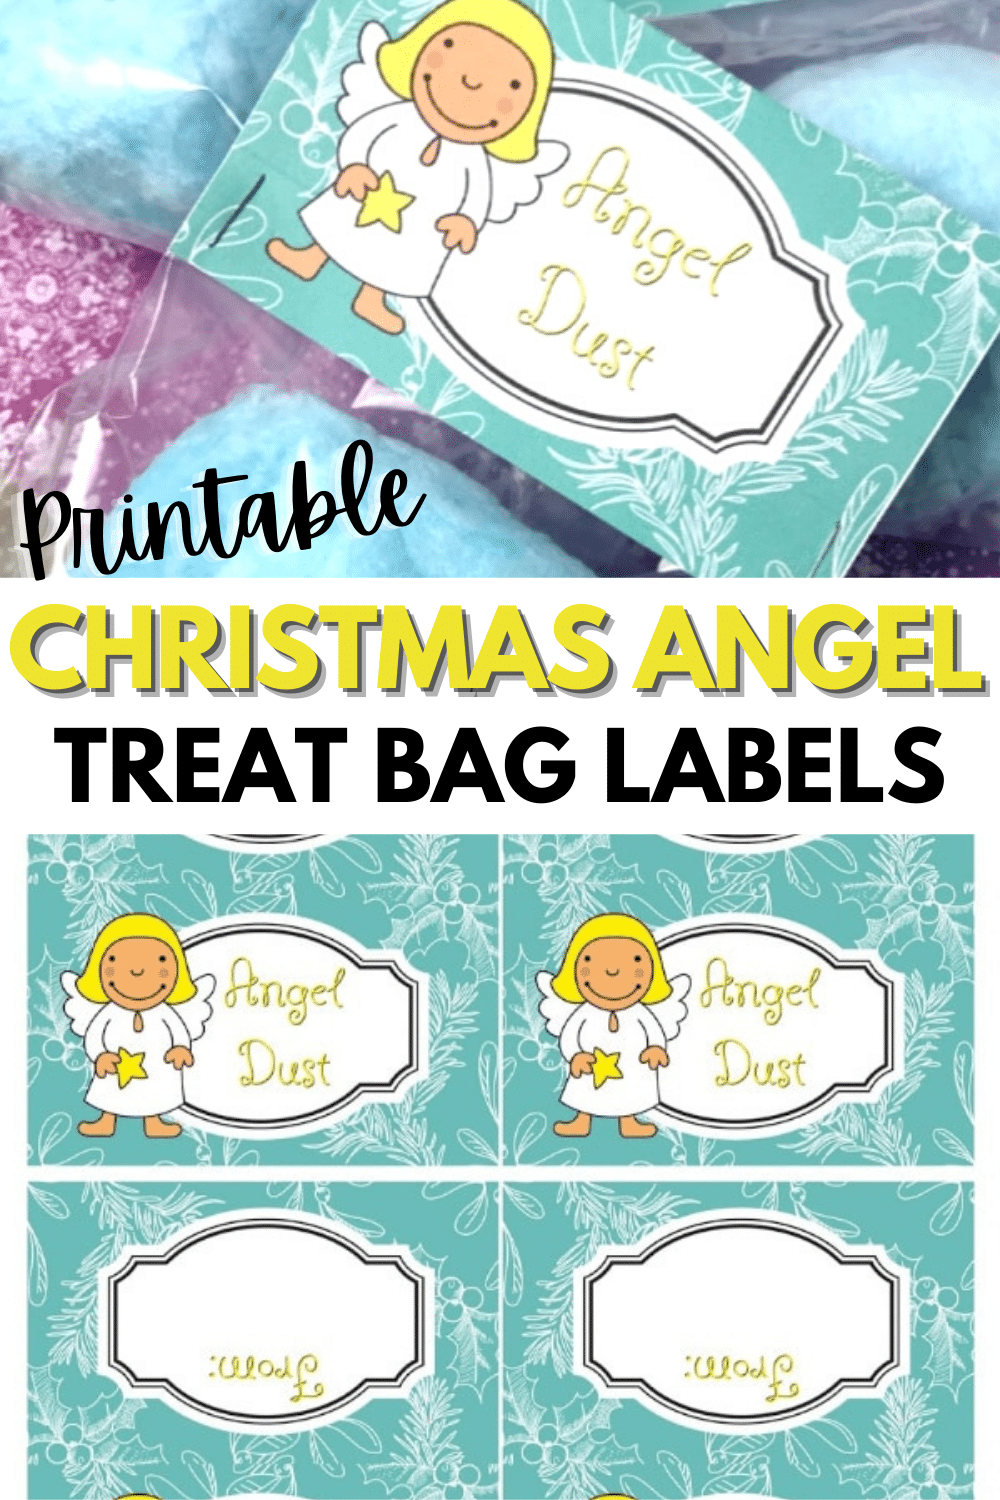 These printable Christmas Angel Treat Bags are easy to make and kids will love getting a bag of "angel dust" aka blue cotton candy as a treat! #treatbags #printables #christmas via @wondermomwannab